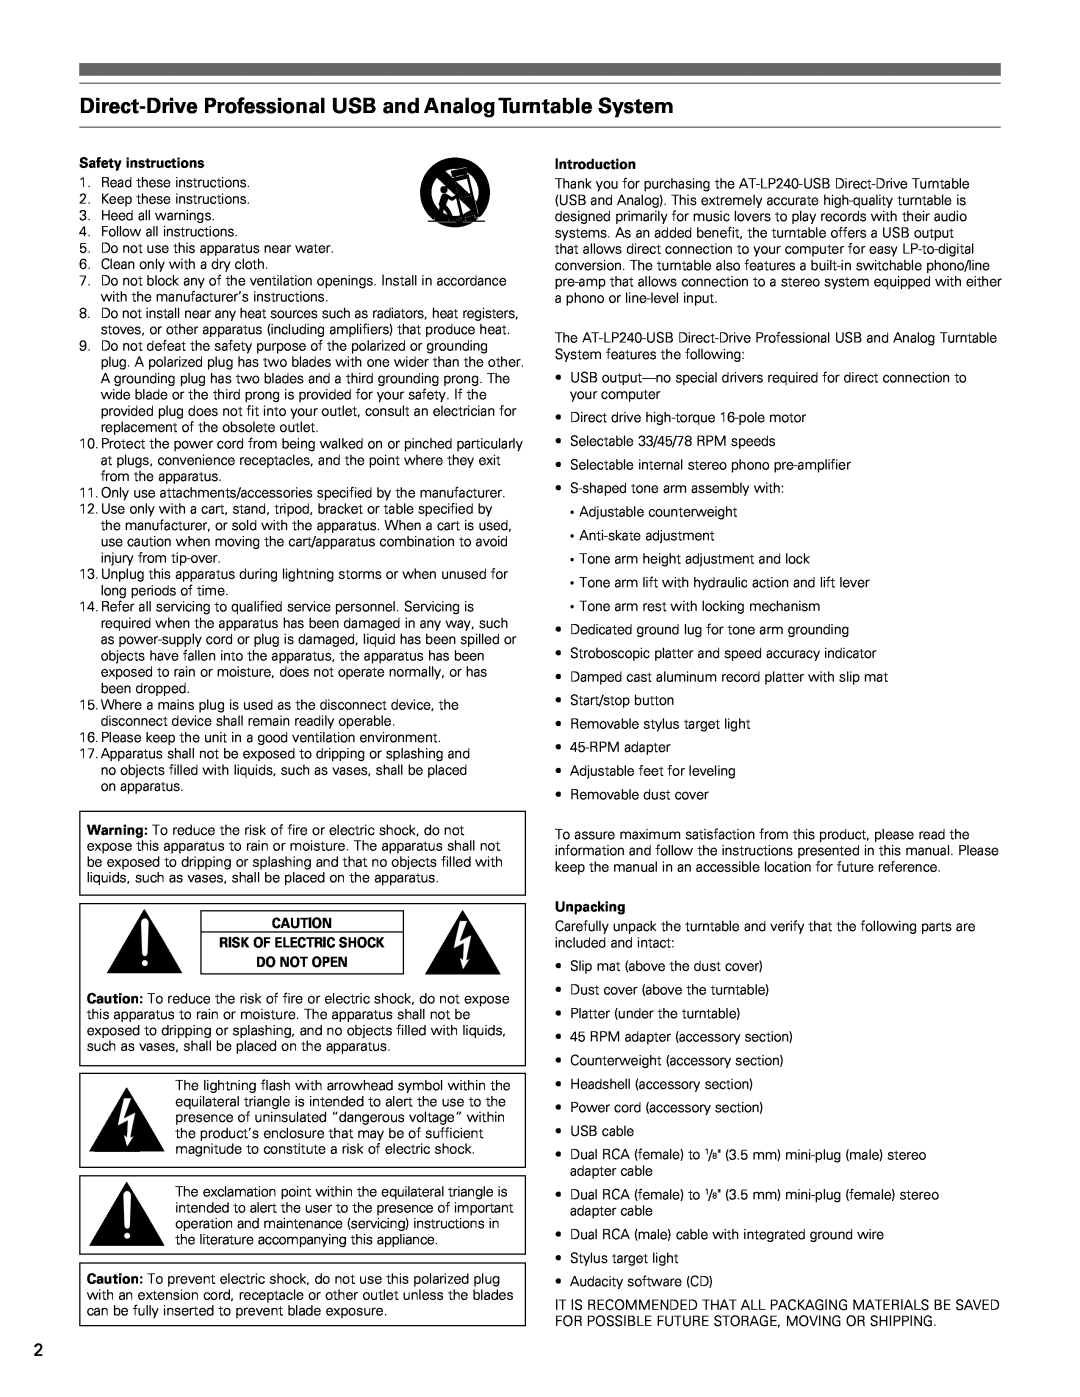 Audio-Technica AT-LP240 manual Safety instructions, Risk Of Electric Shock Do Not Open, Introduction, Unpacking 